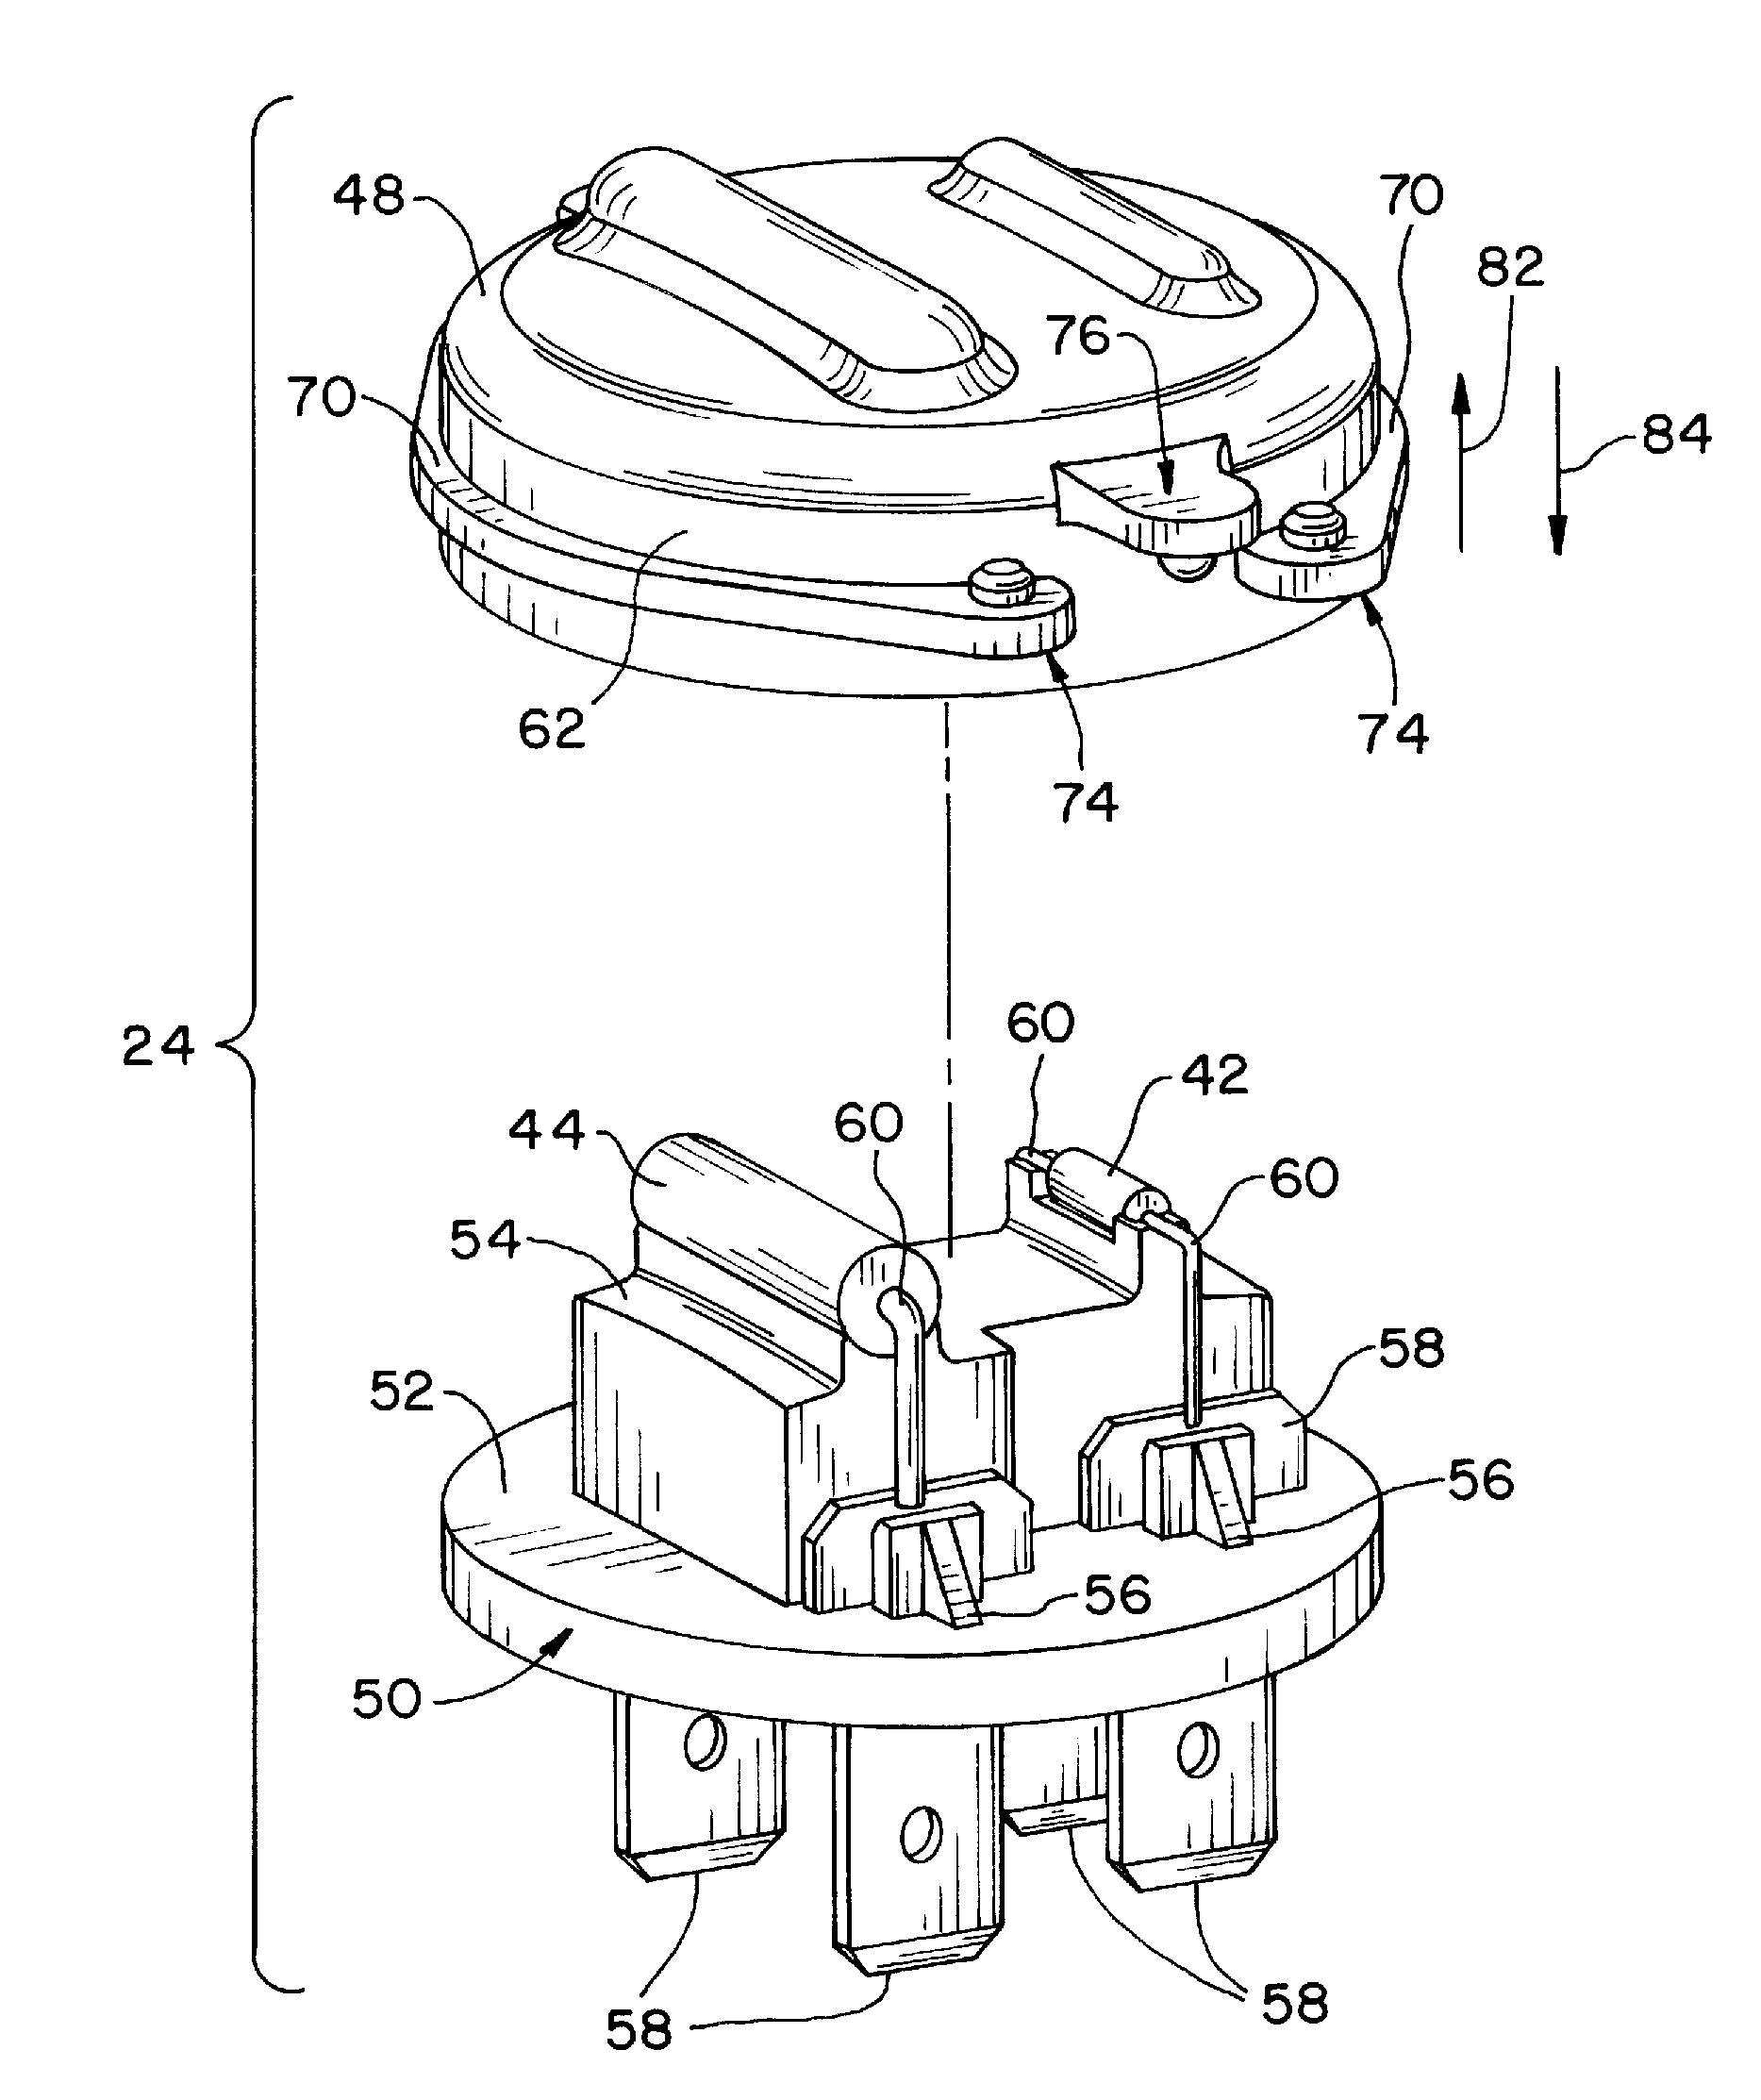 Thermal assembly coupled with an appliance